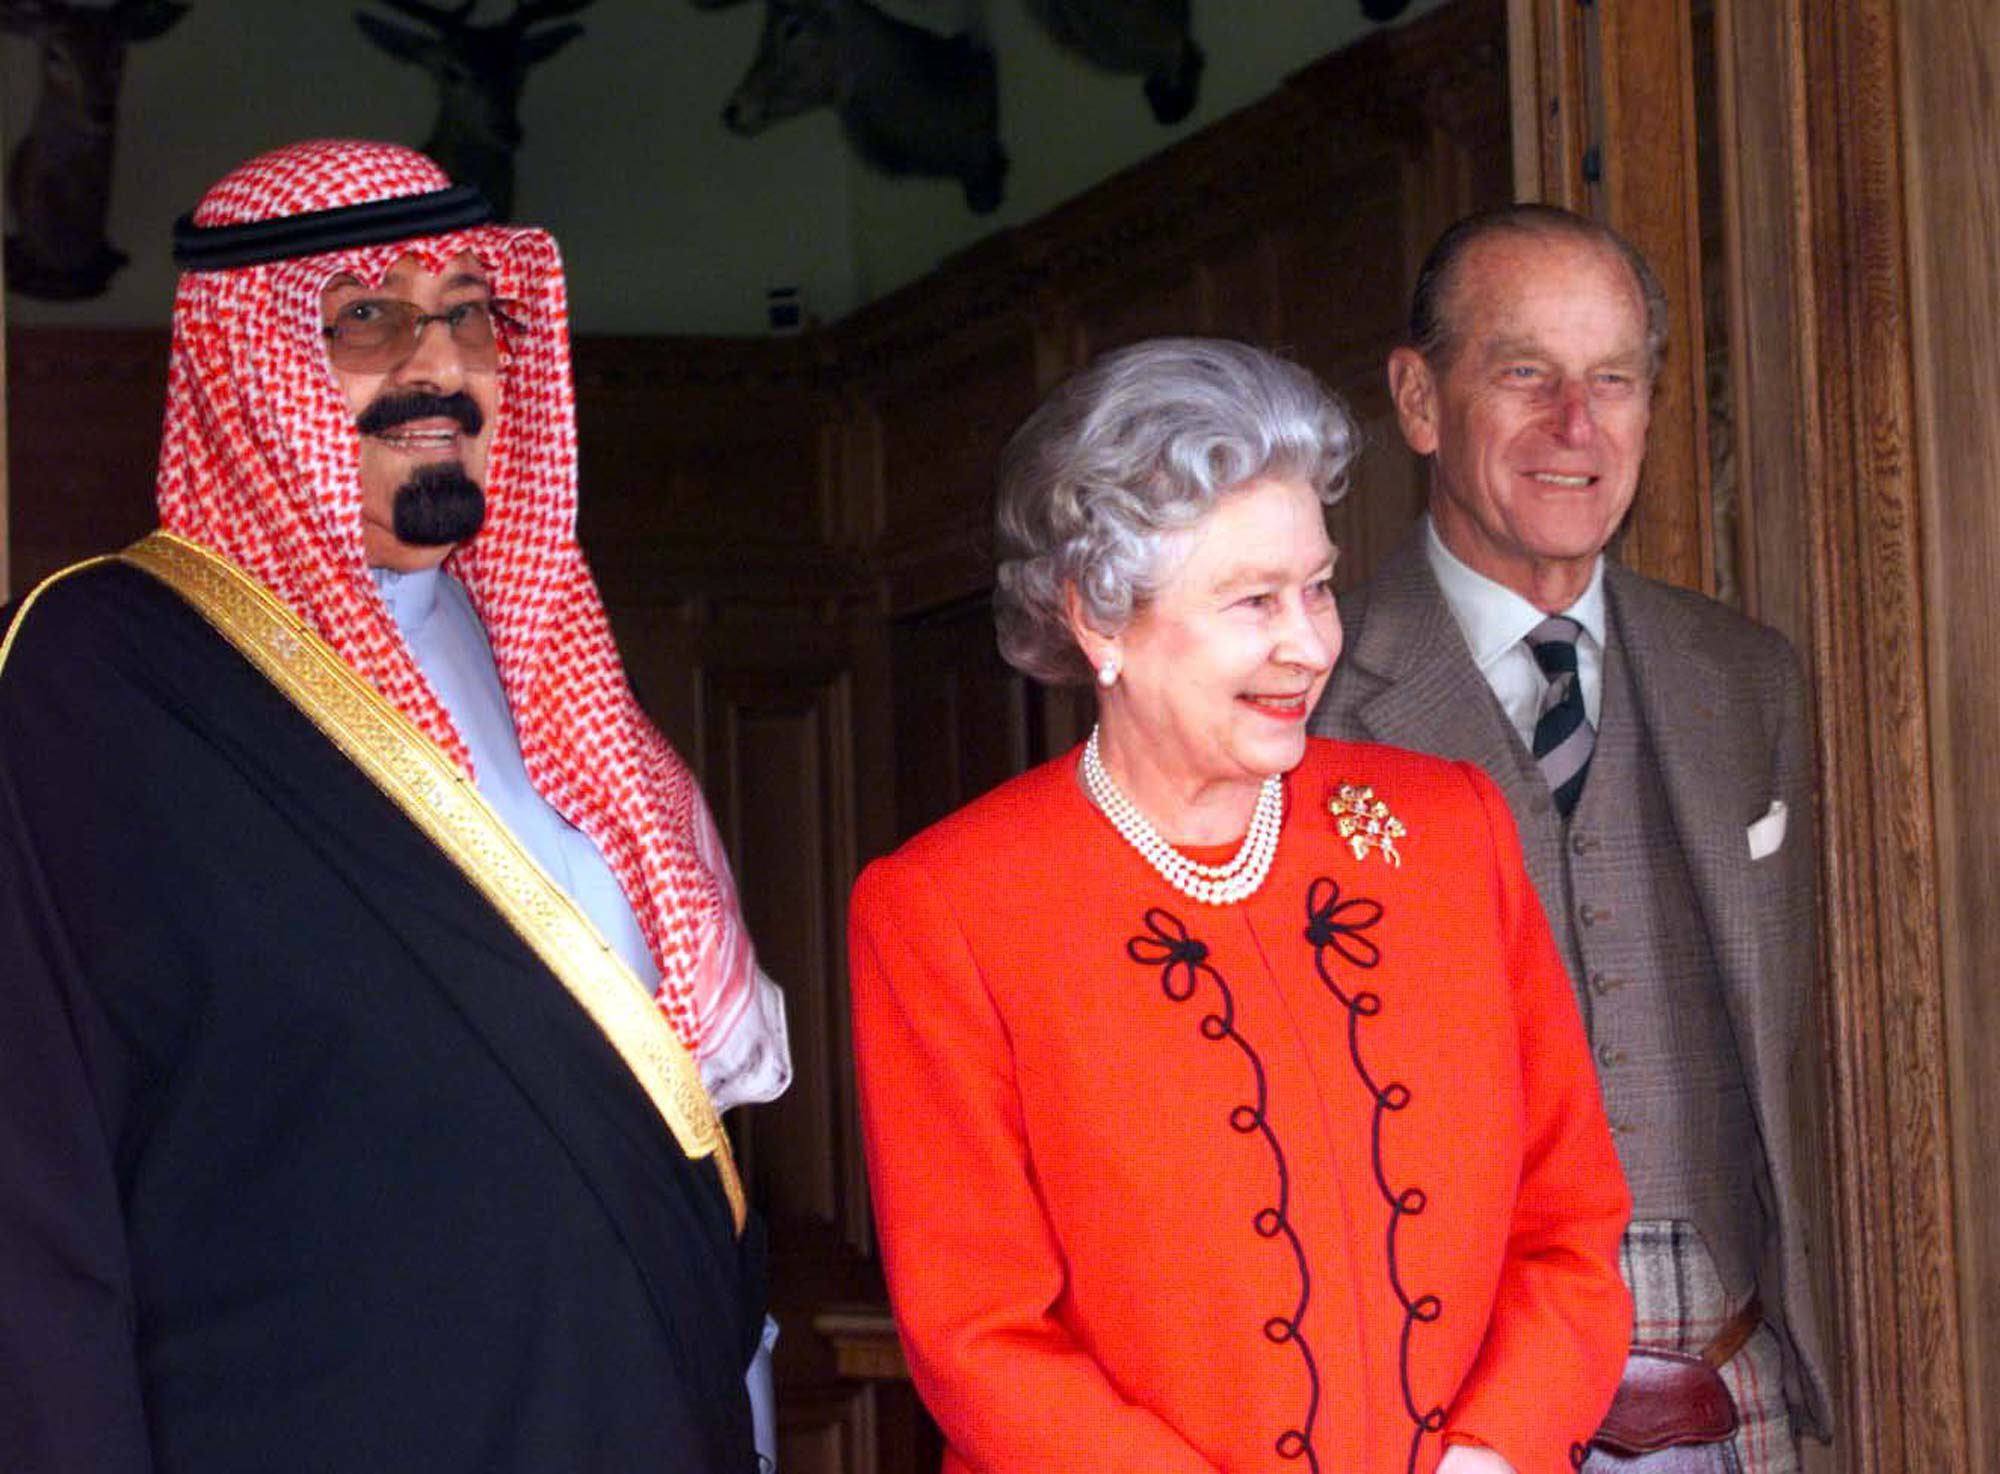 Queen Elizabeth and the Duke of Edinburgh with the late crown prince of Saudi Arabia during a visit to the UK in 1998. Photo: AFP